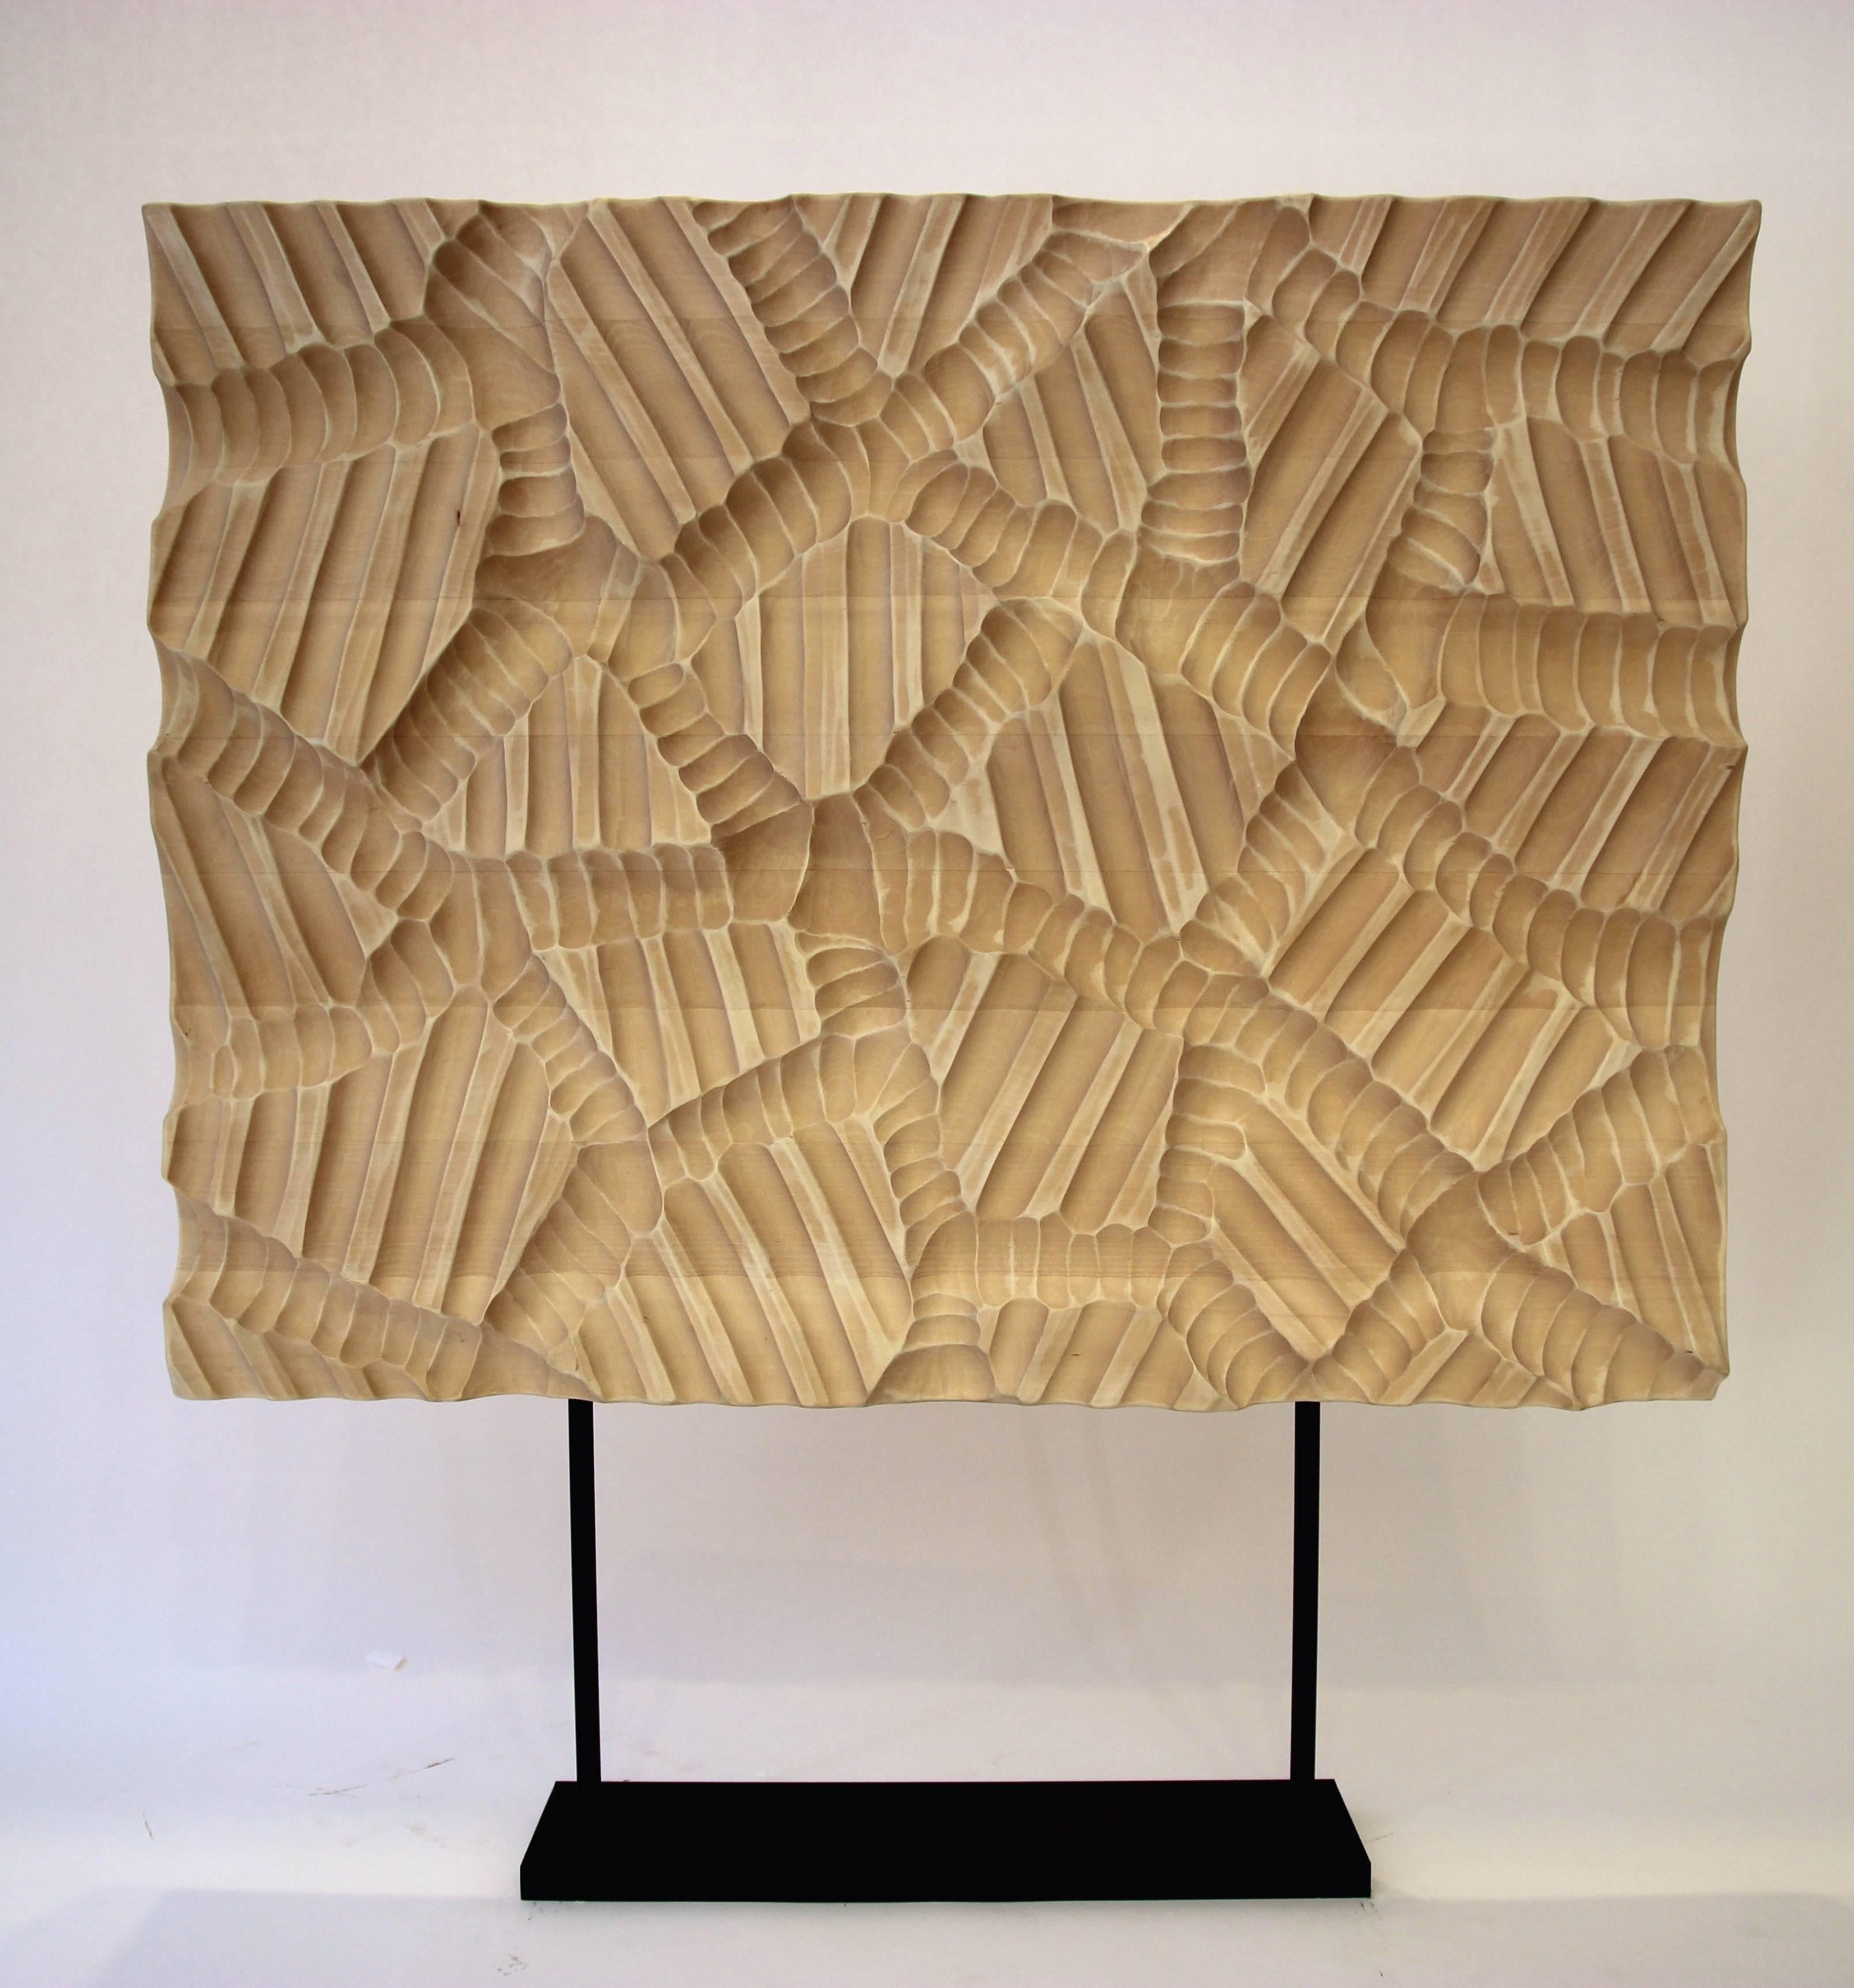 Decorative panel signed Giuseppe Rivadossi,
carved wood, iron frame,
circa 2010, Italy.
Measures with base: Height 91 cm, width 64 cm, depth 7 cm.
Without base height: 84 cm.